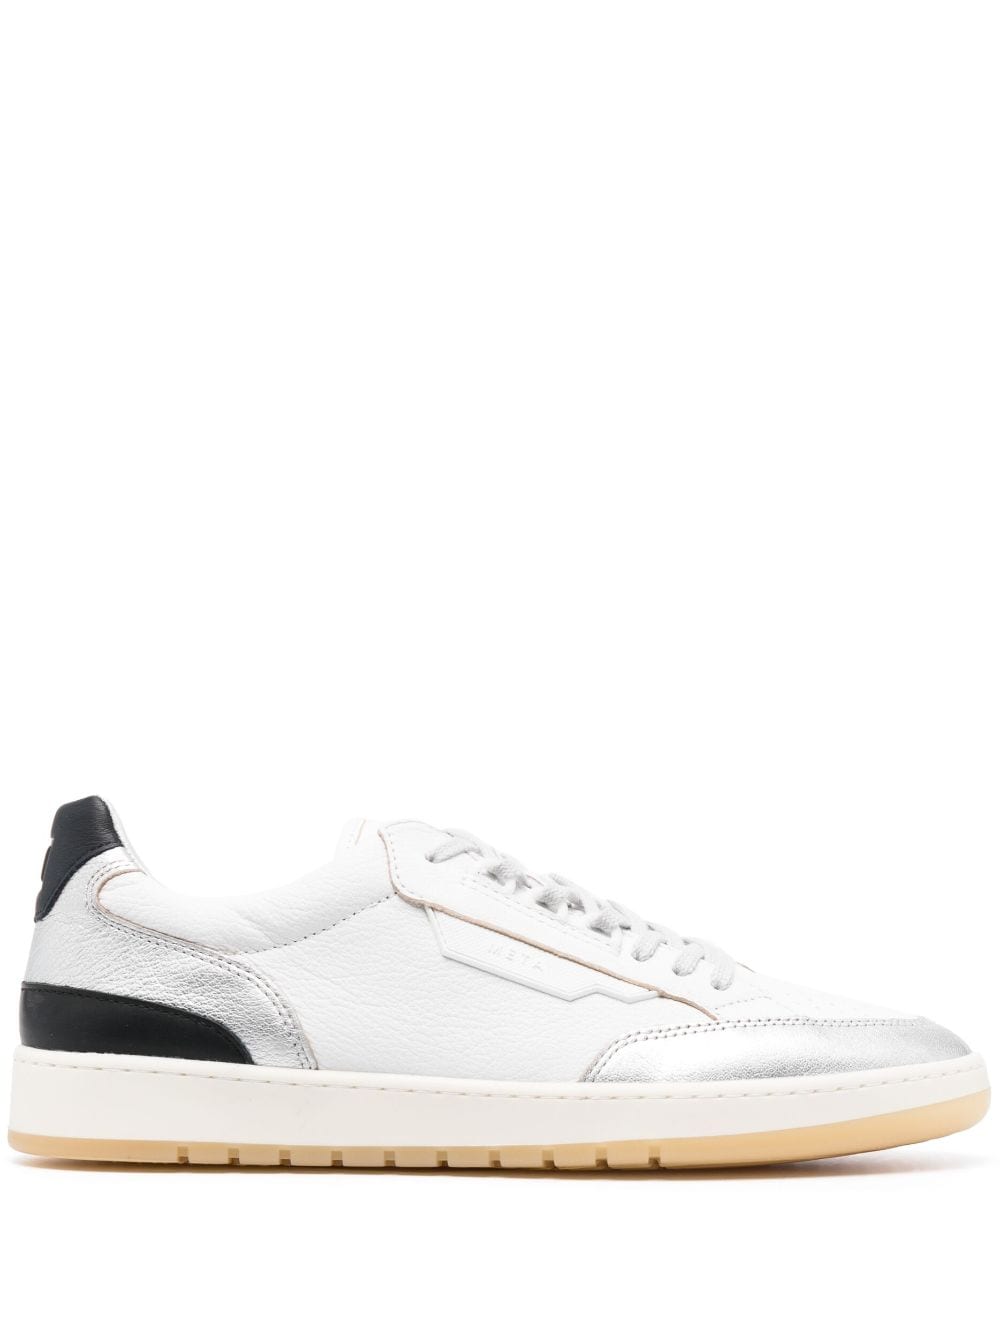 D.A.T.E. perforated toe-box leather sneakers - White von D.A.T.E.